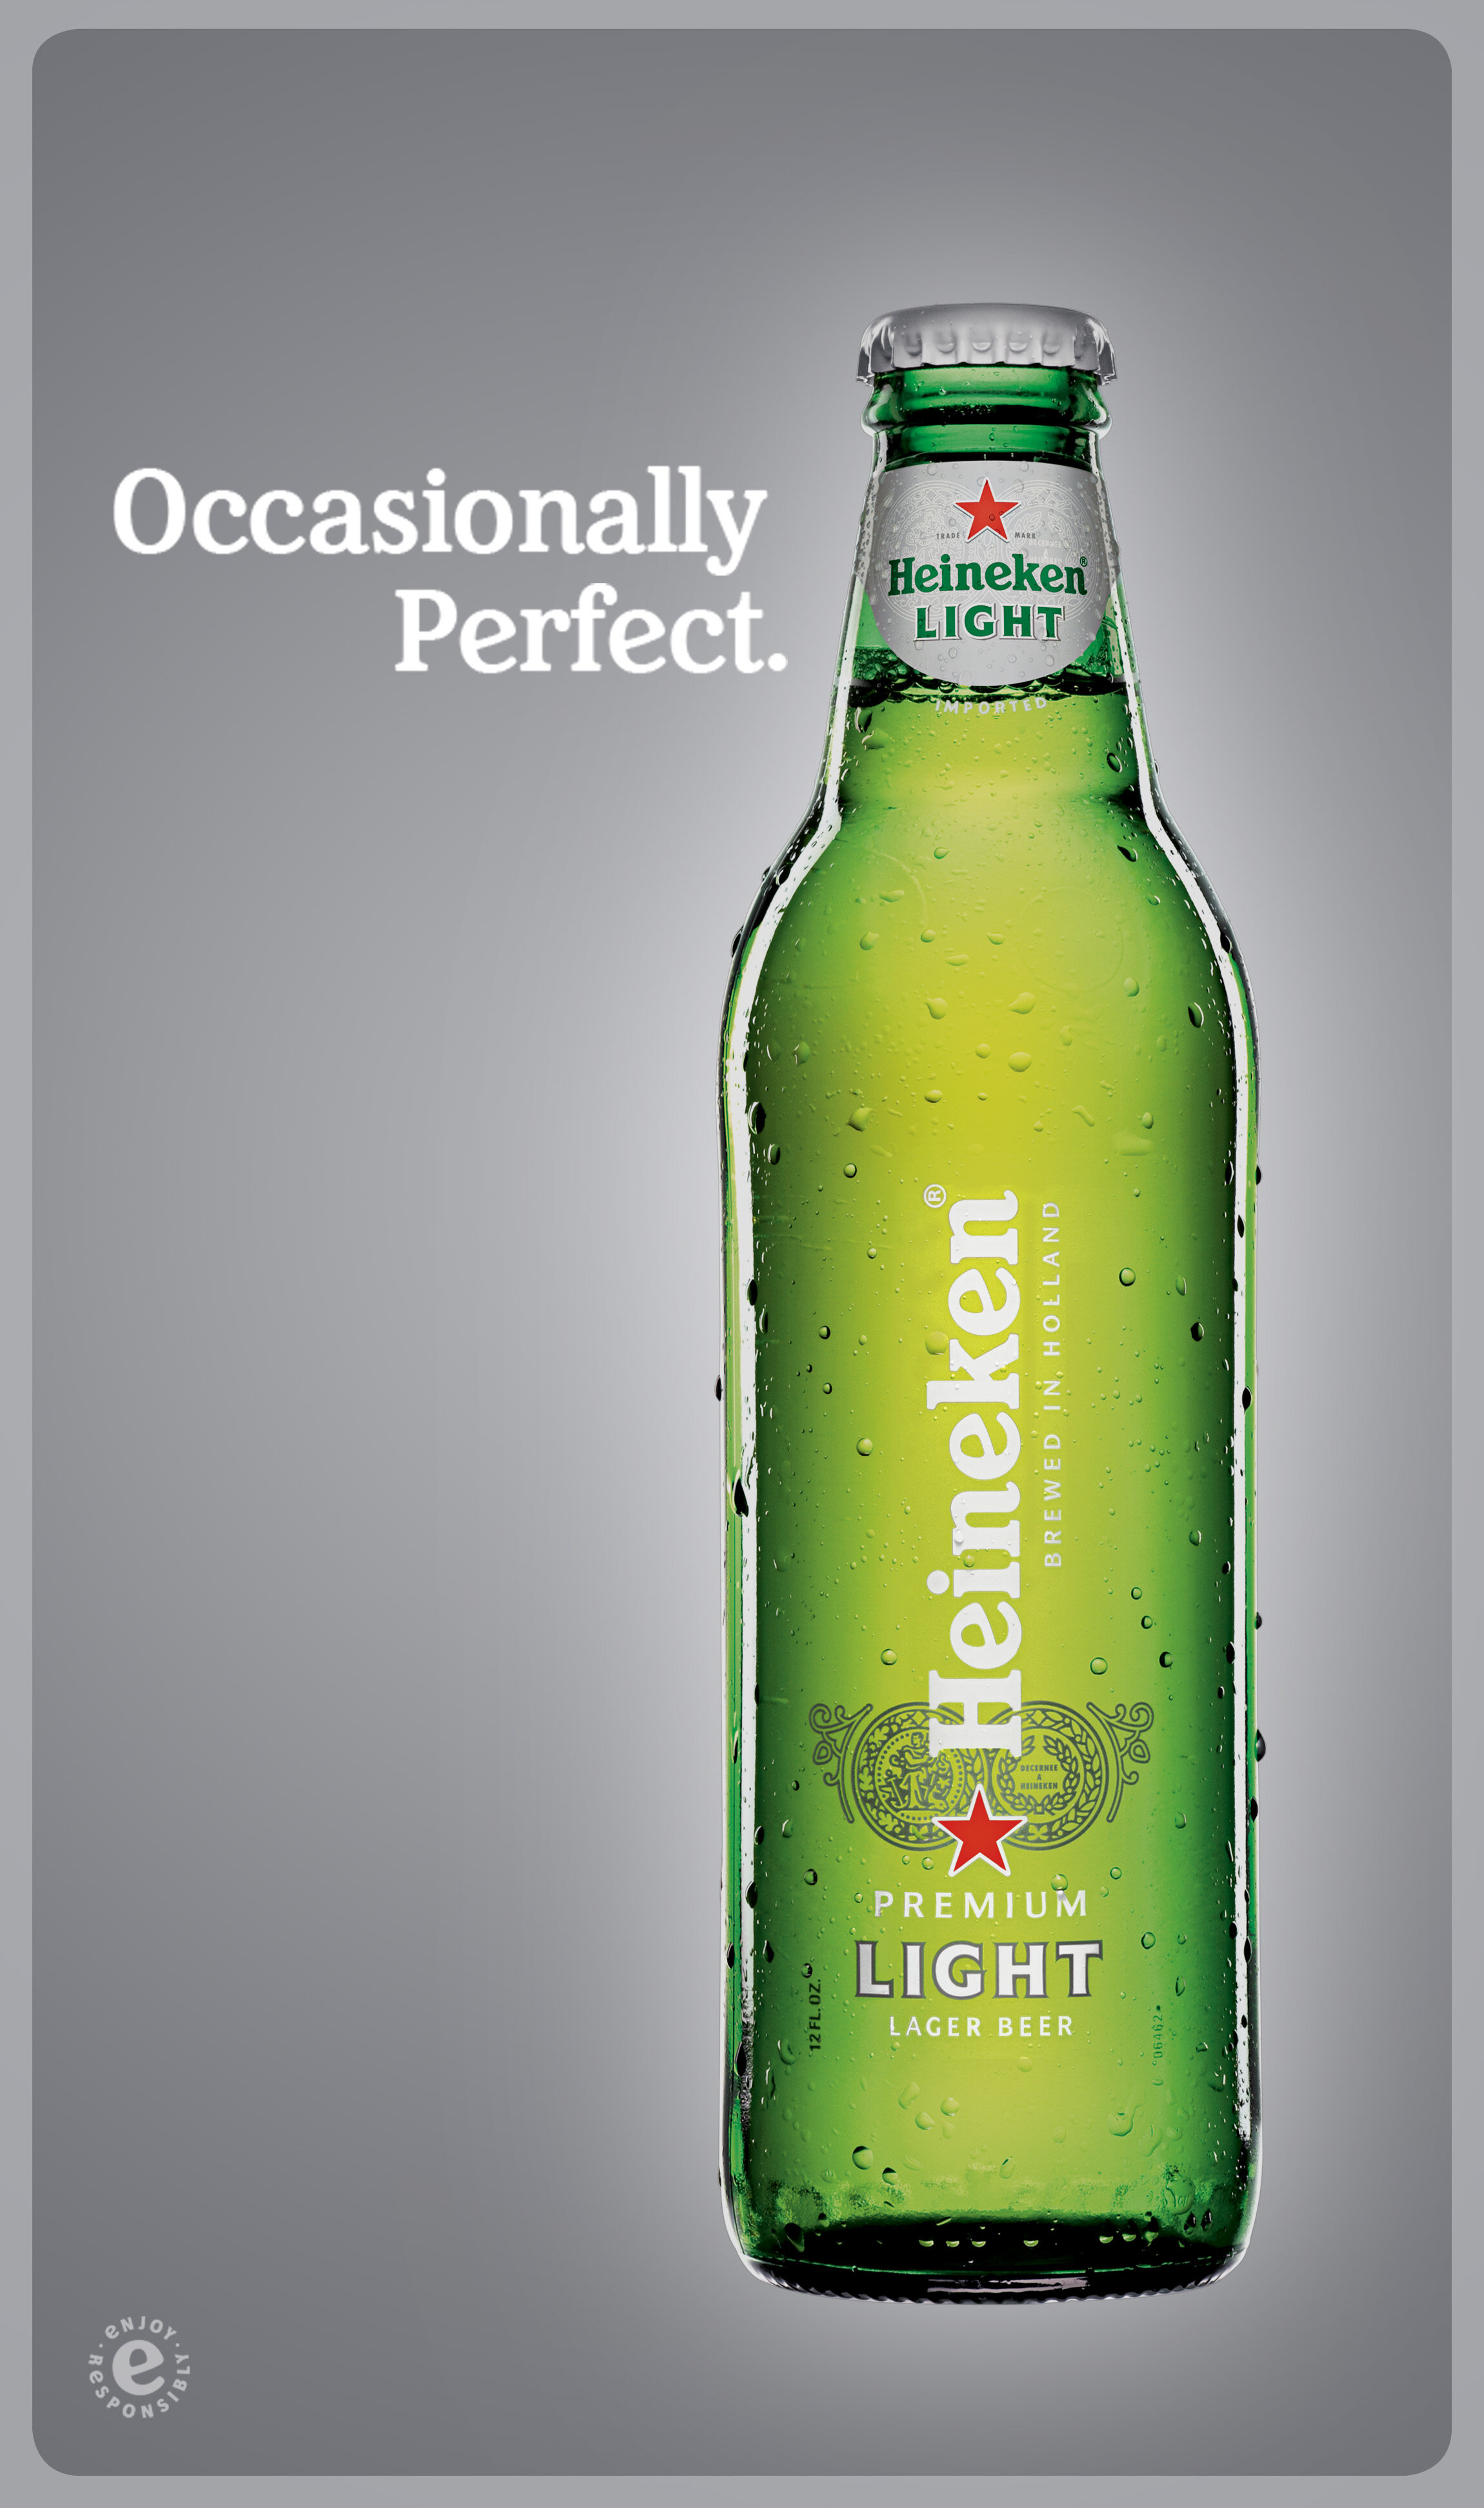  Every occasion isn’t right for Heineken Light. It’s the perfect beer for situations that call for something a little more unique and special. 